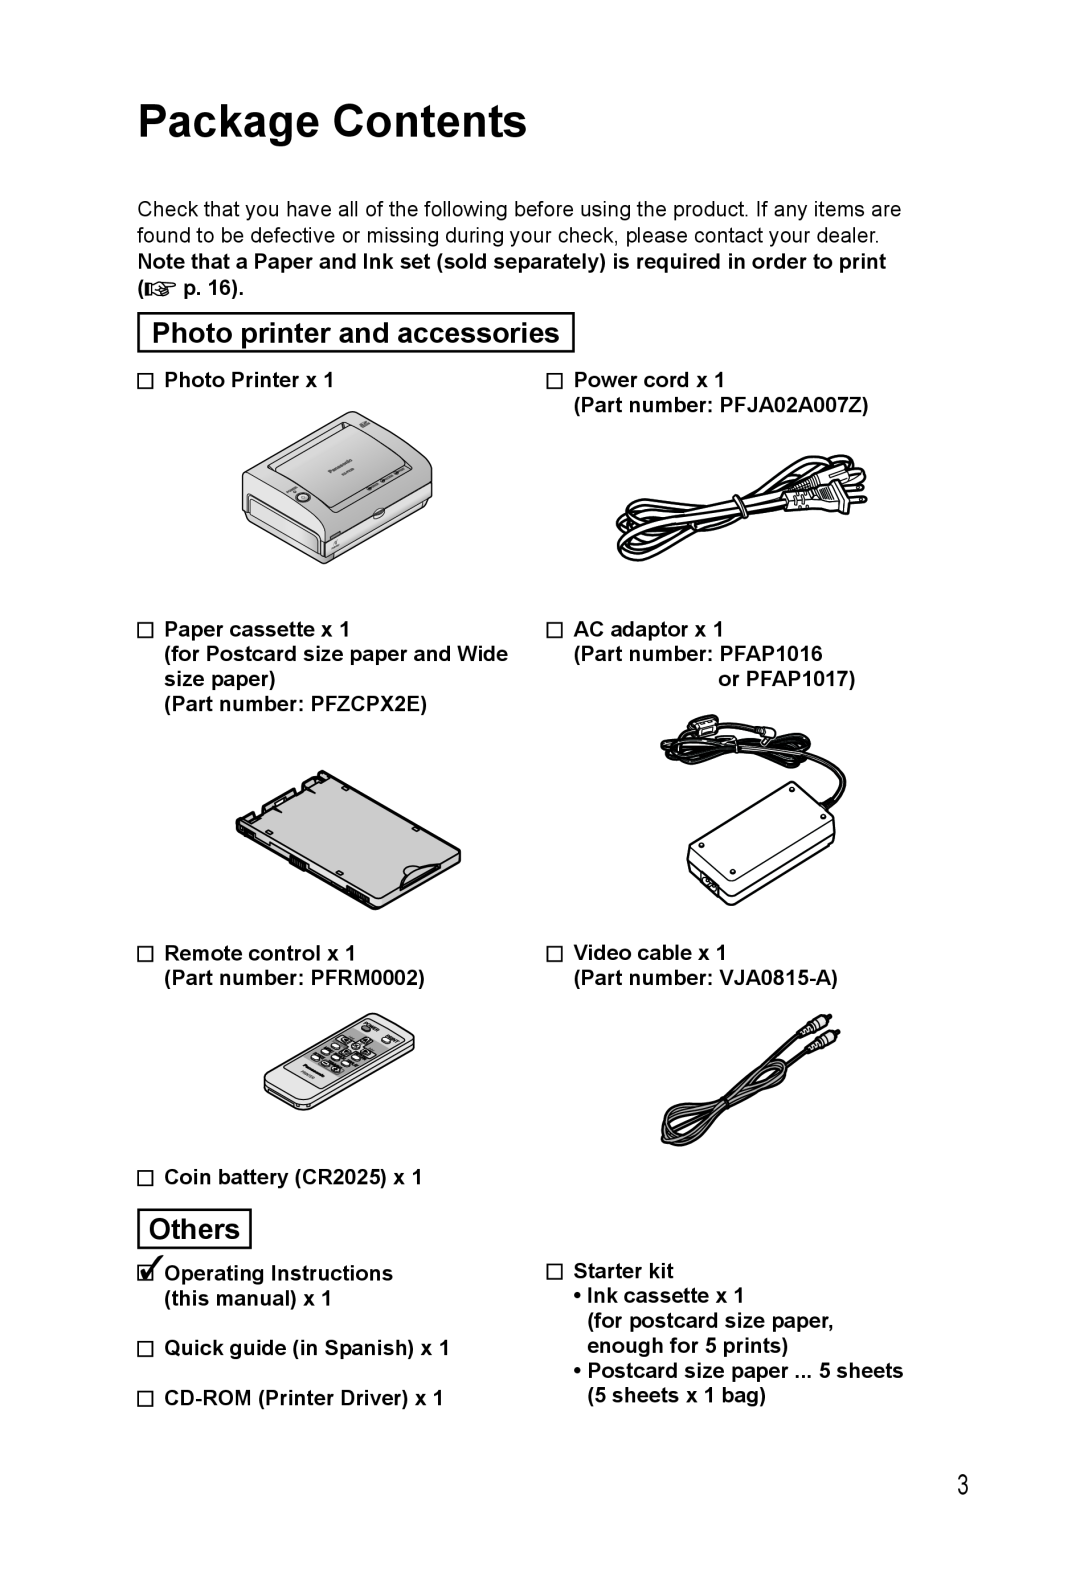 Panasonic KX-PX20M operating instructions Package Contents, Photo printer and accessories, Others 